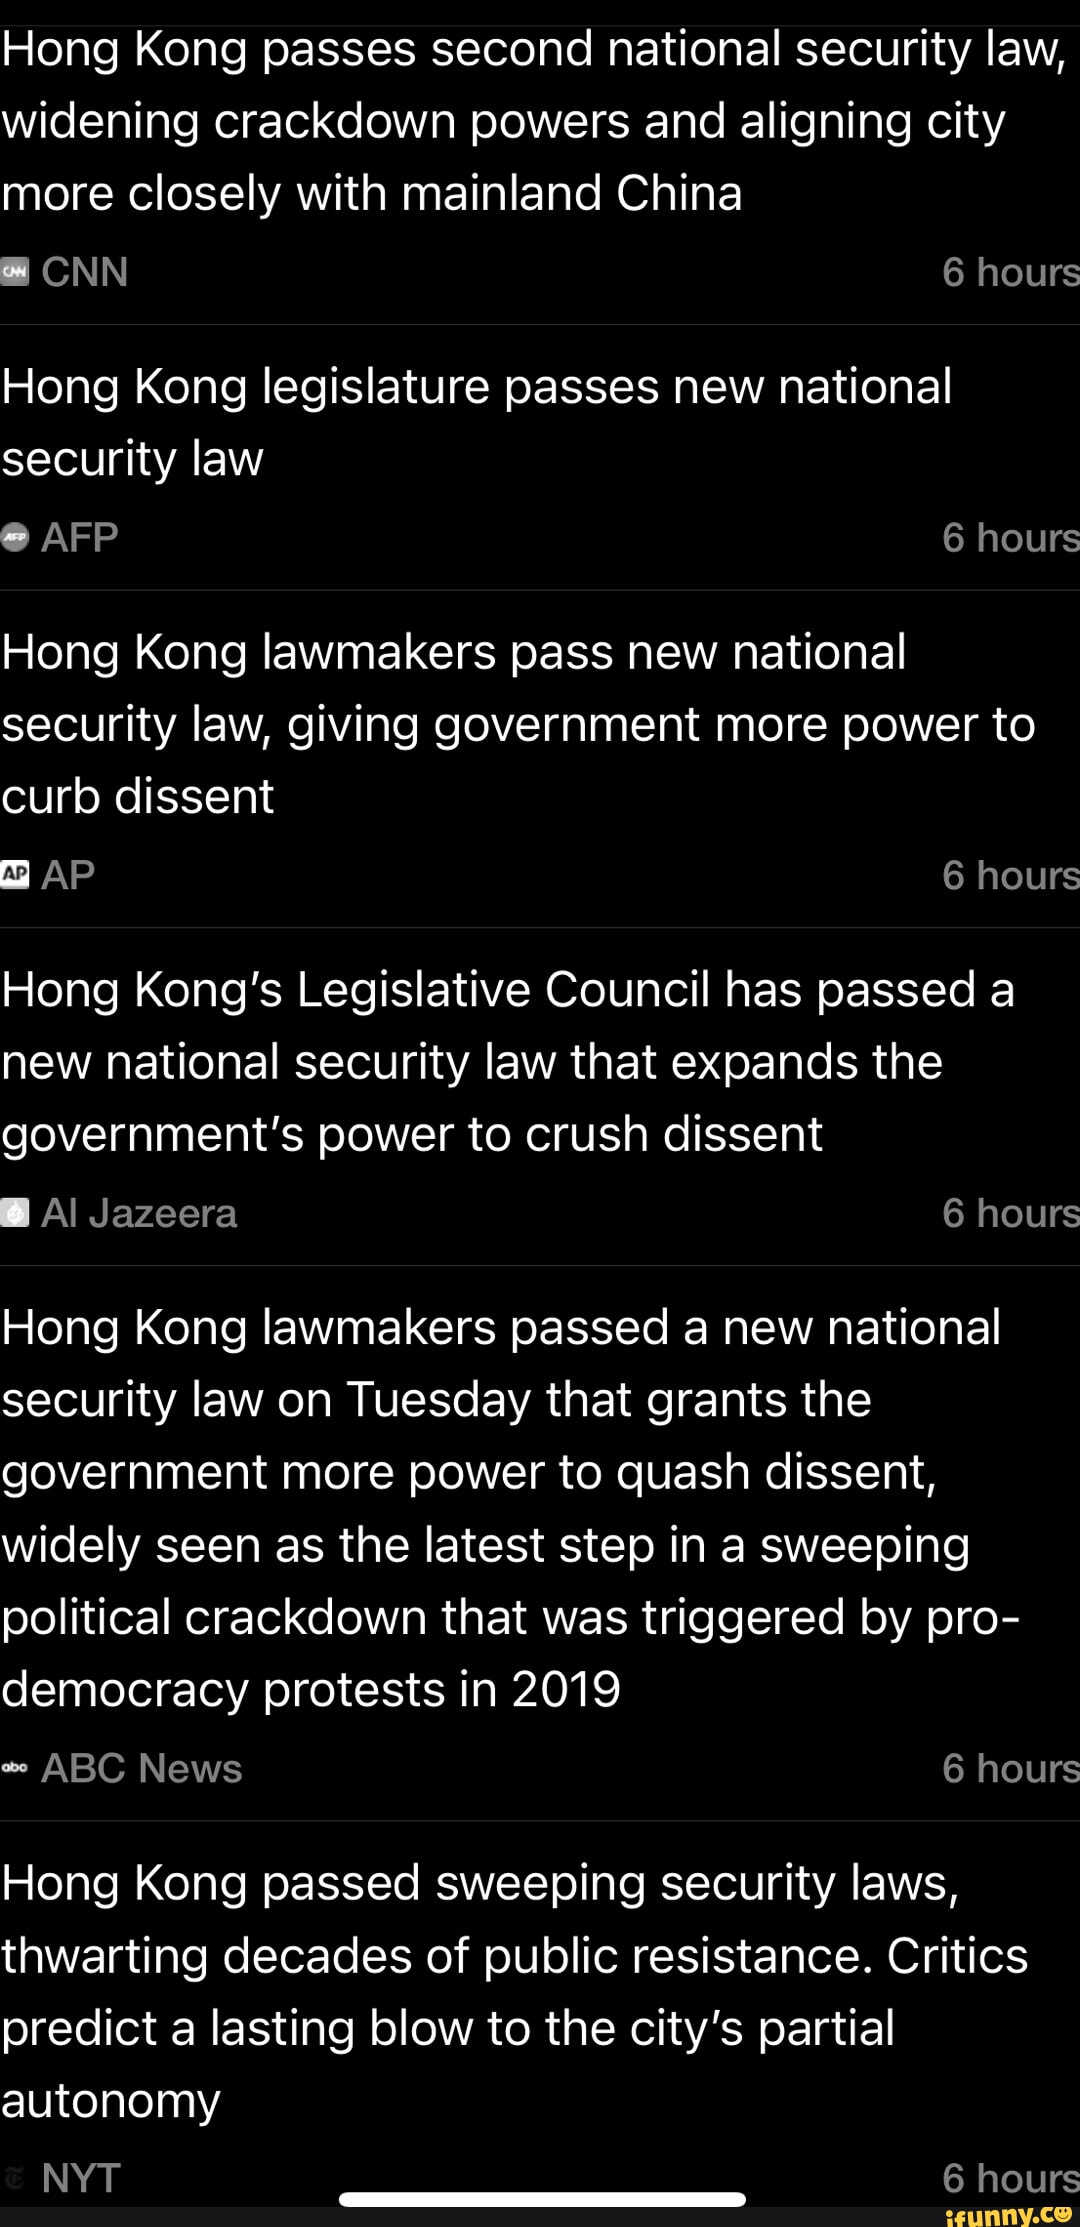 Hong Kong passes second national security law, widening crackdown powers  and aligning city more closely with mainland China, World News